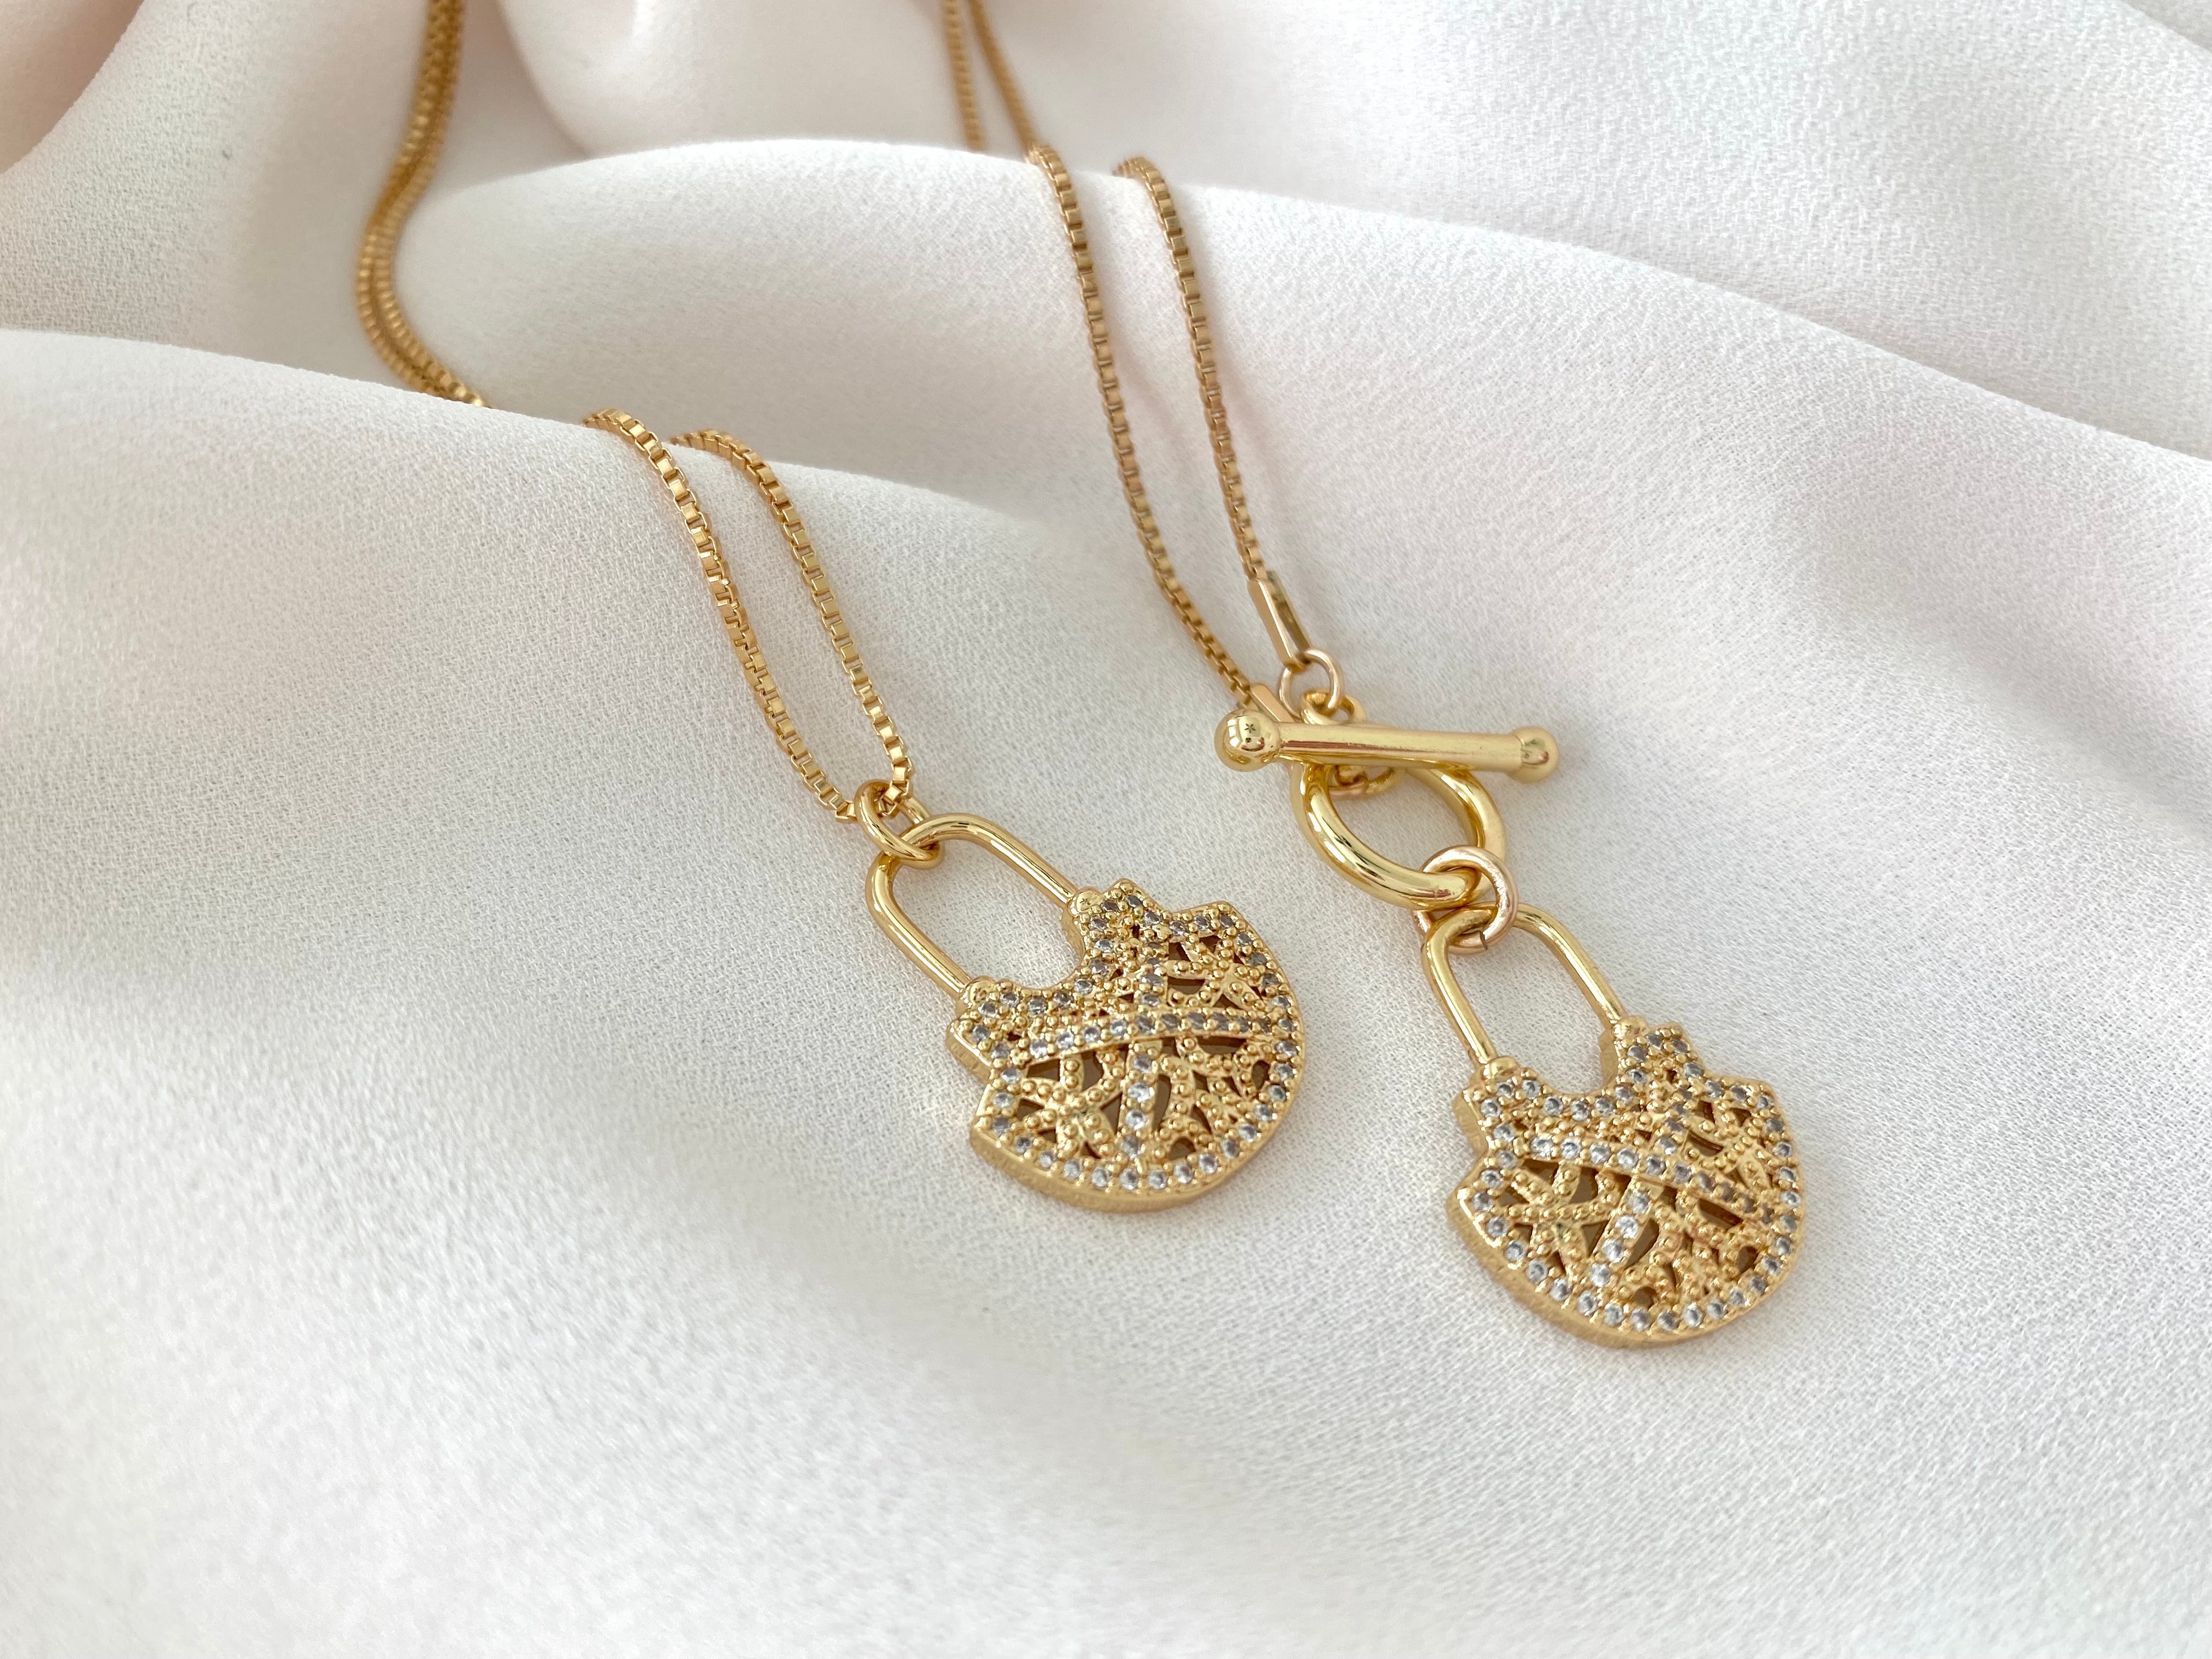 Gold Filled Pave Locket Toggle Necklace - Box Chain